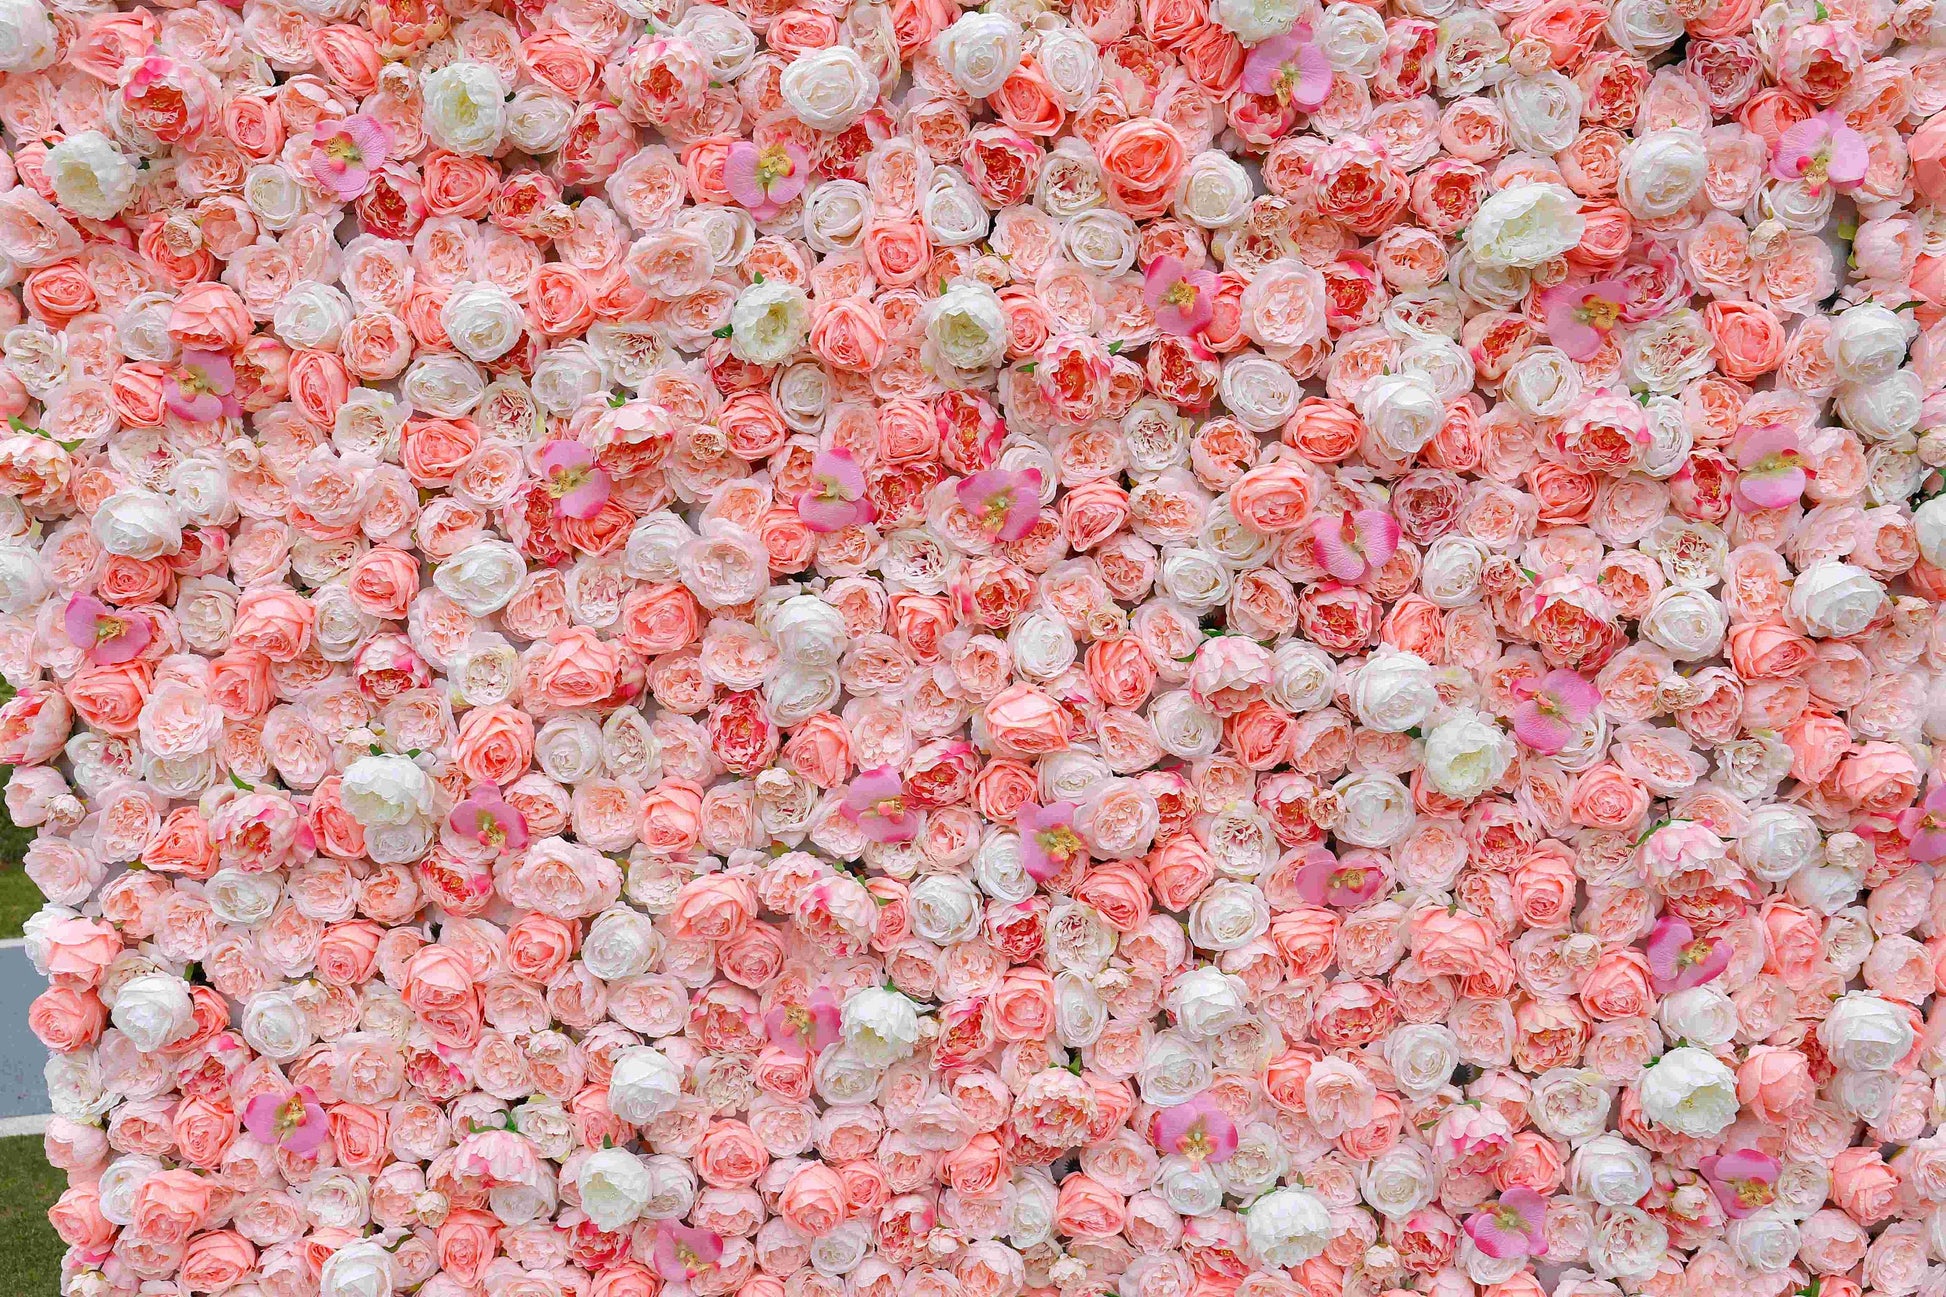 Champagne Pink Floral Wall For Wedding Arrangement Event Salon Party Photography Backdrop Fabric Rolling Up Curtain Fabric Cloth